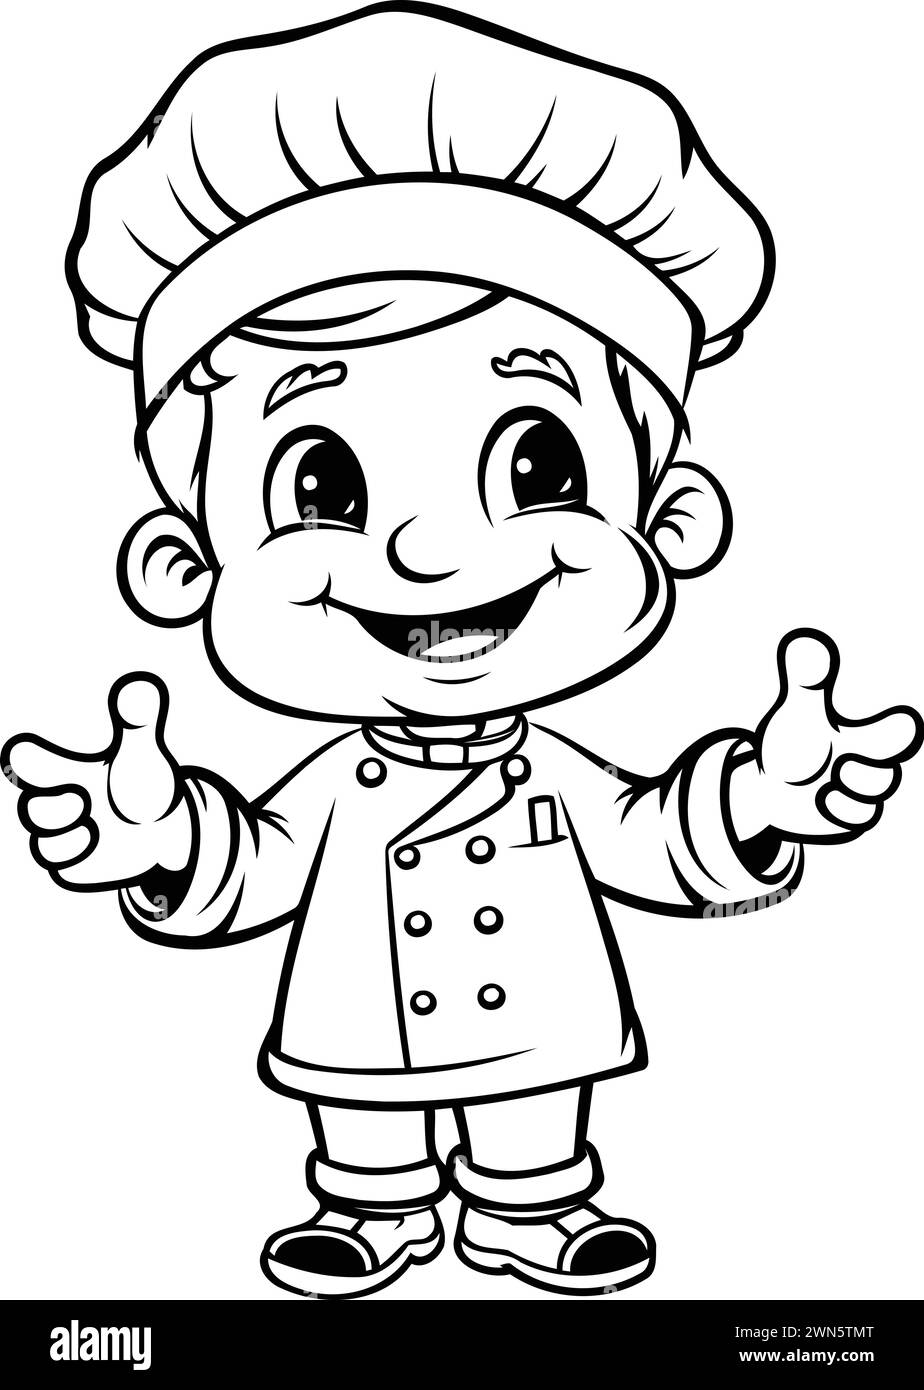 Chef Cartoon Mascot Character Vector Illustration for Coloring Book Stock Vector